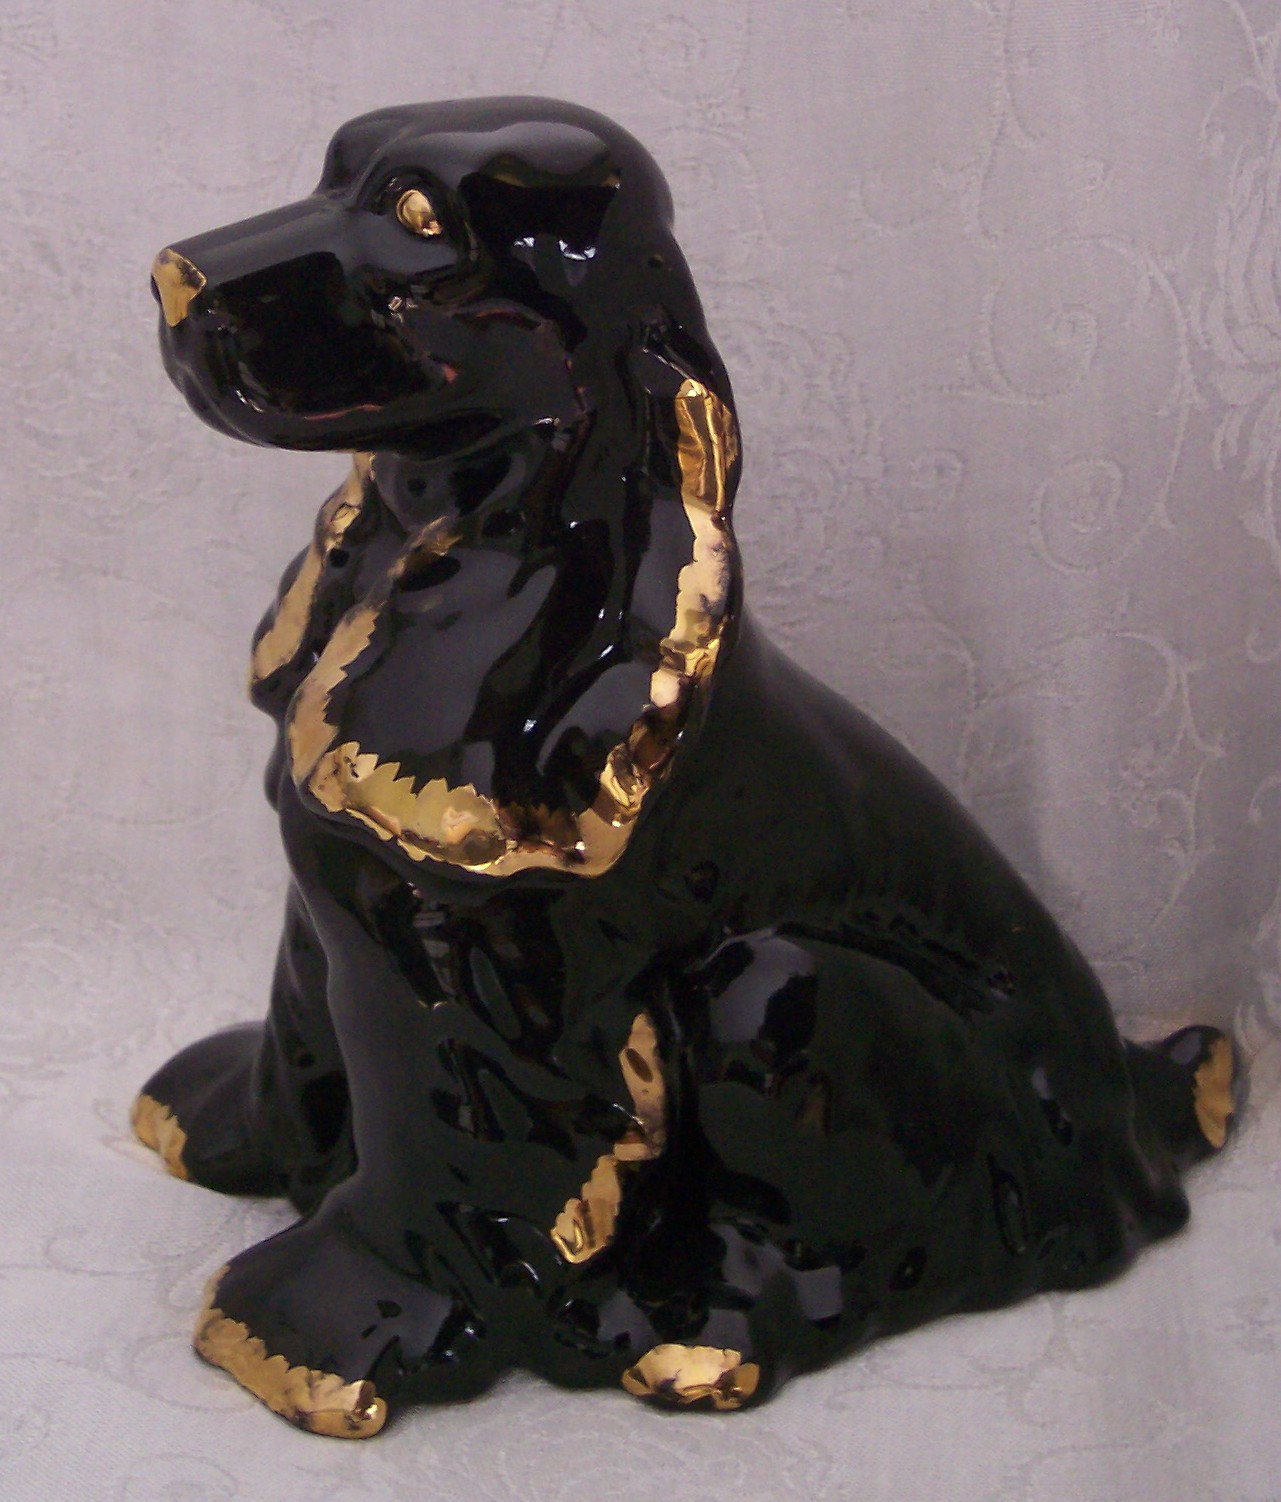 23 Stylish Royal Haeger Vase R1752 2024 free download royal haeger vase r1752 of cameron clay cocker spaniel figurine statue and 50 similar items intended for metlox mccoy black cocker spaniel figurine gold trim1